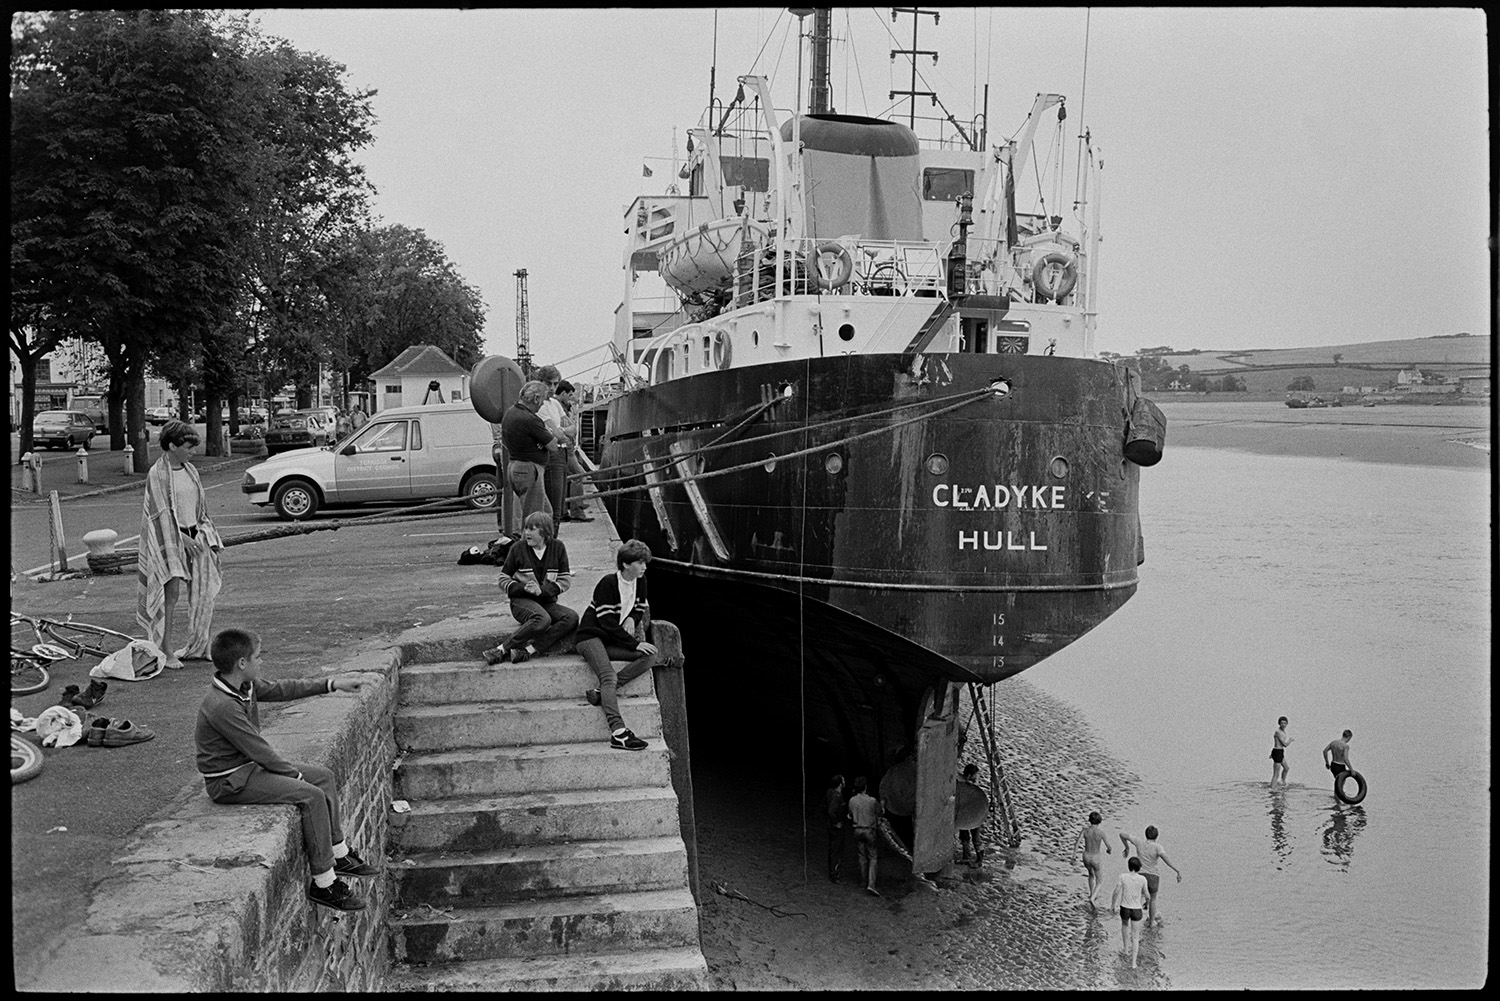 Children playing at quay with ship alongside quay, swimming. 
[Children playing by steps on Bideford Quay near to the Cladyke Hull which is moored alongside the Quay. Some children are swimming in the River Torridge near the ship.]